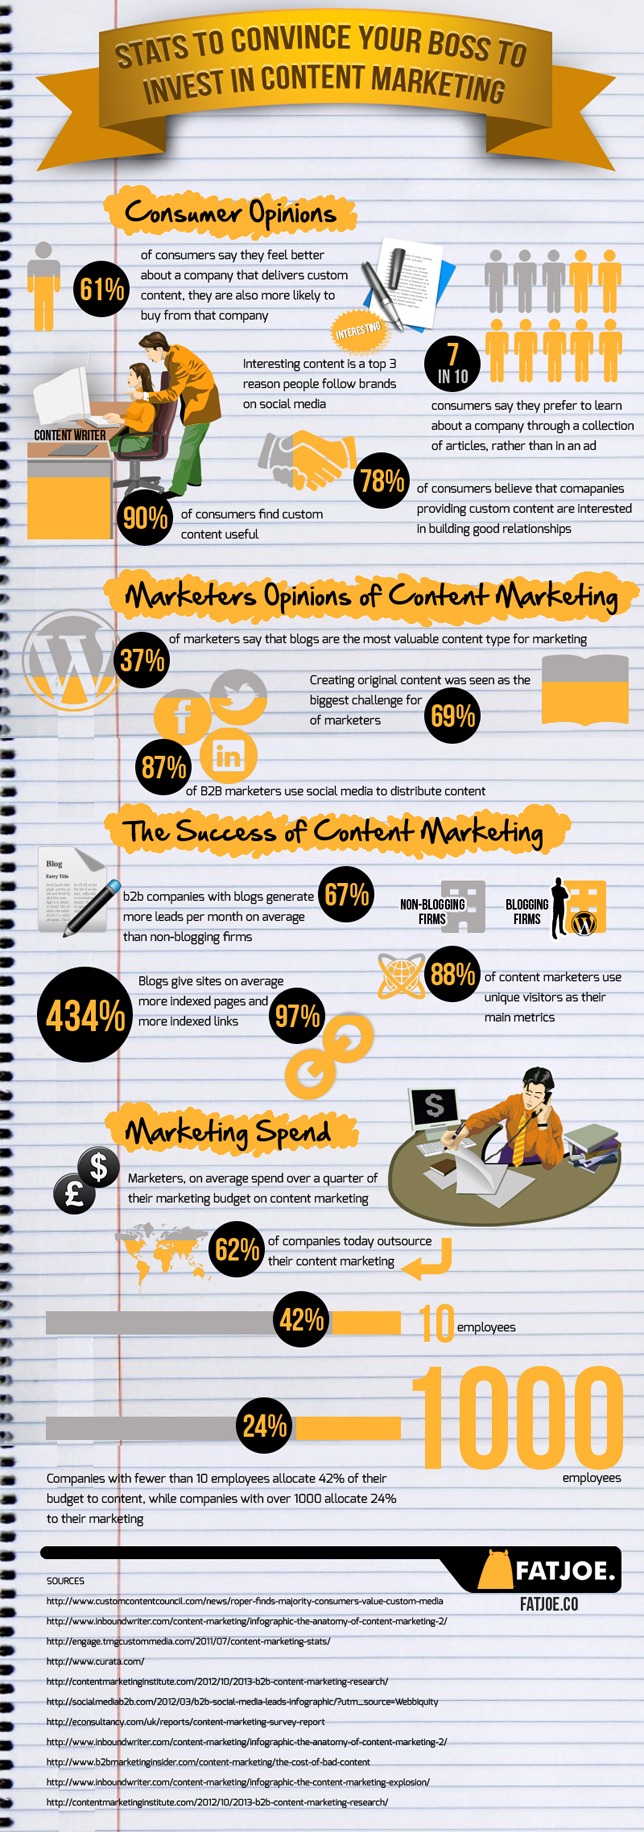 Stats To Convince Your Boss To Invest In Content Marketing